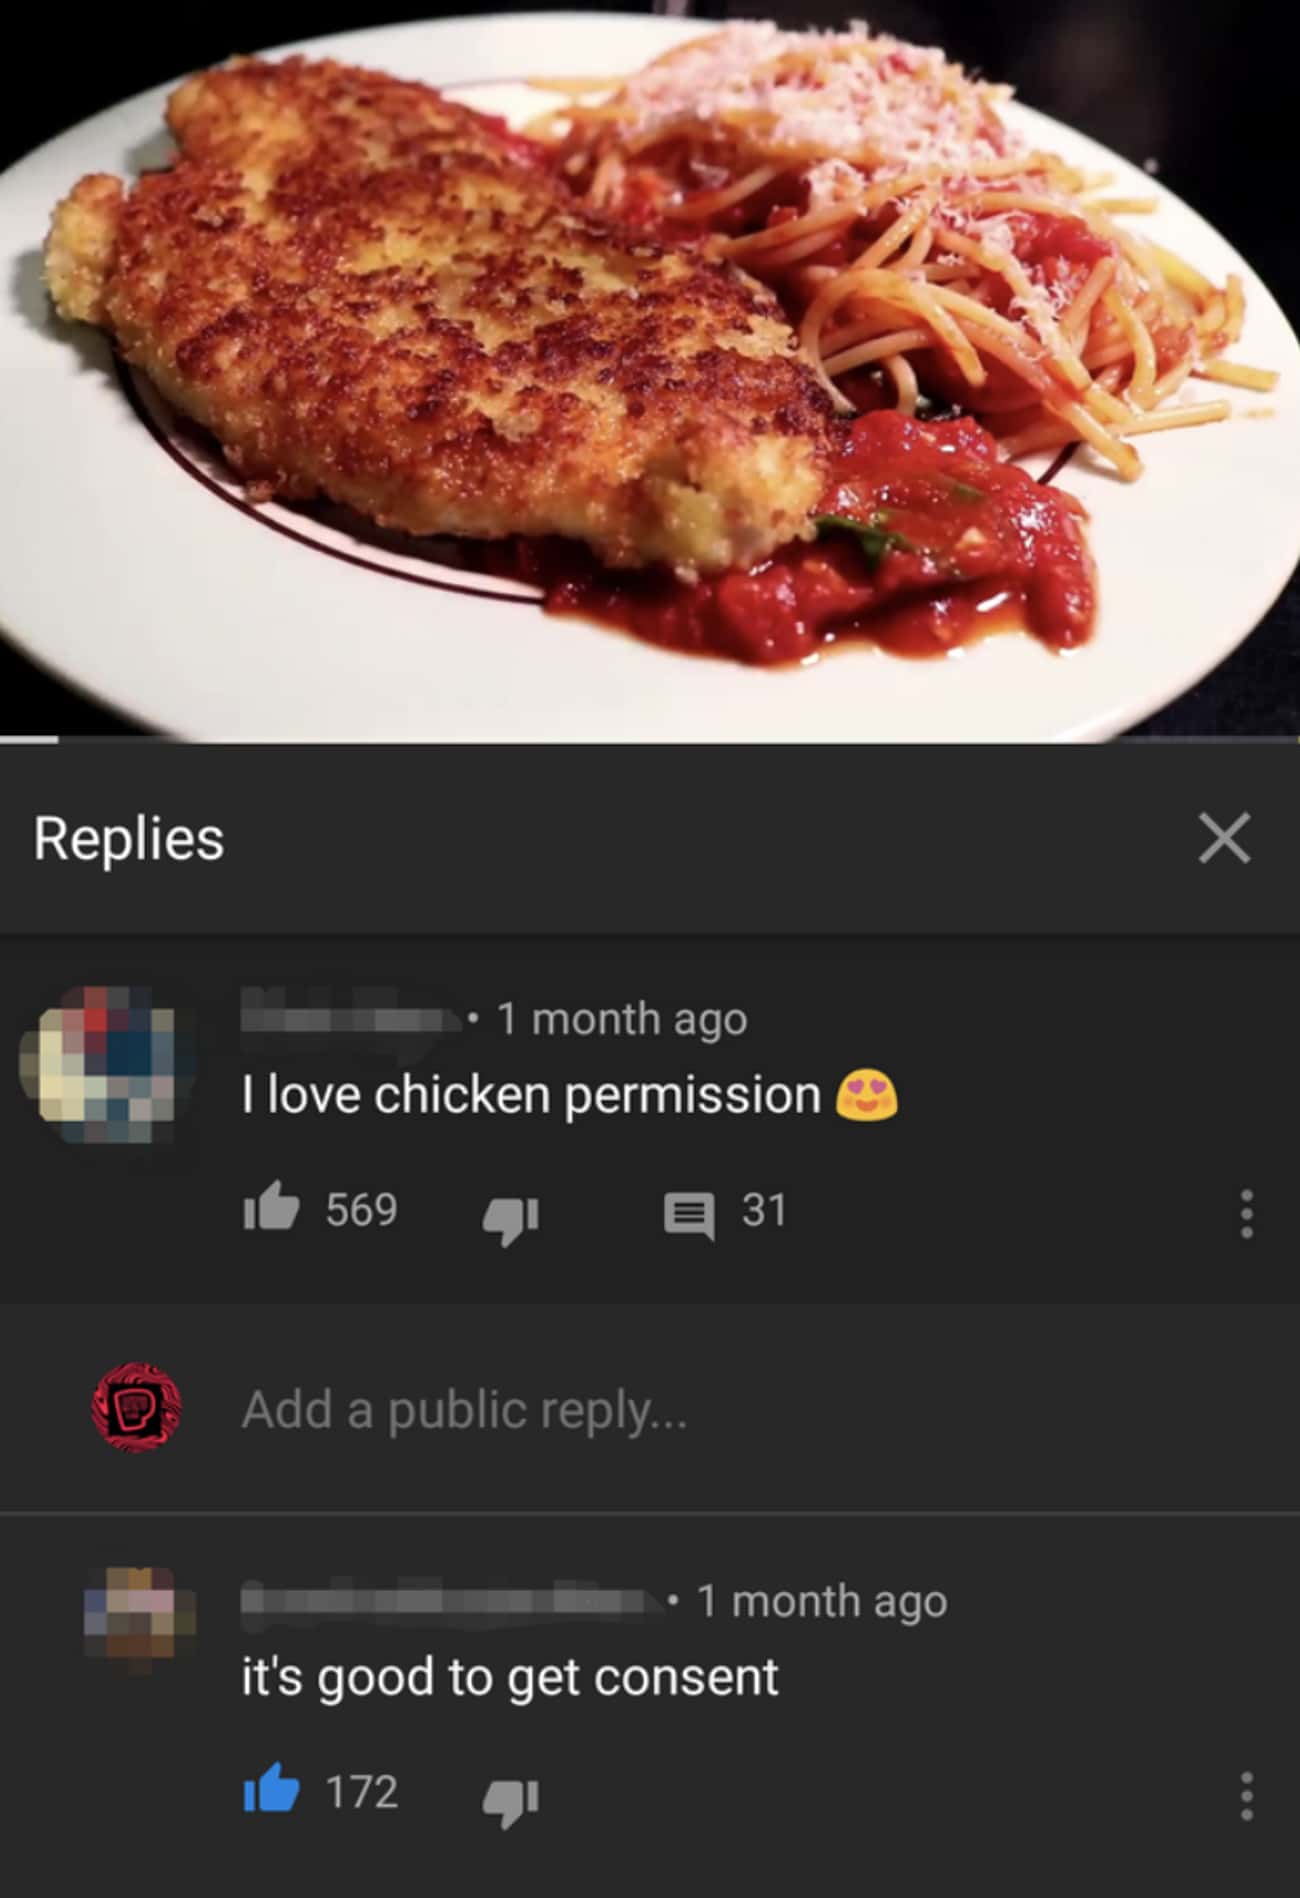 Who Doesn't Love Chicken Permission?